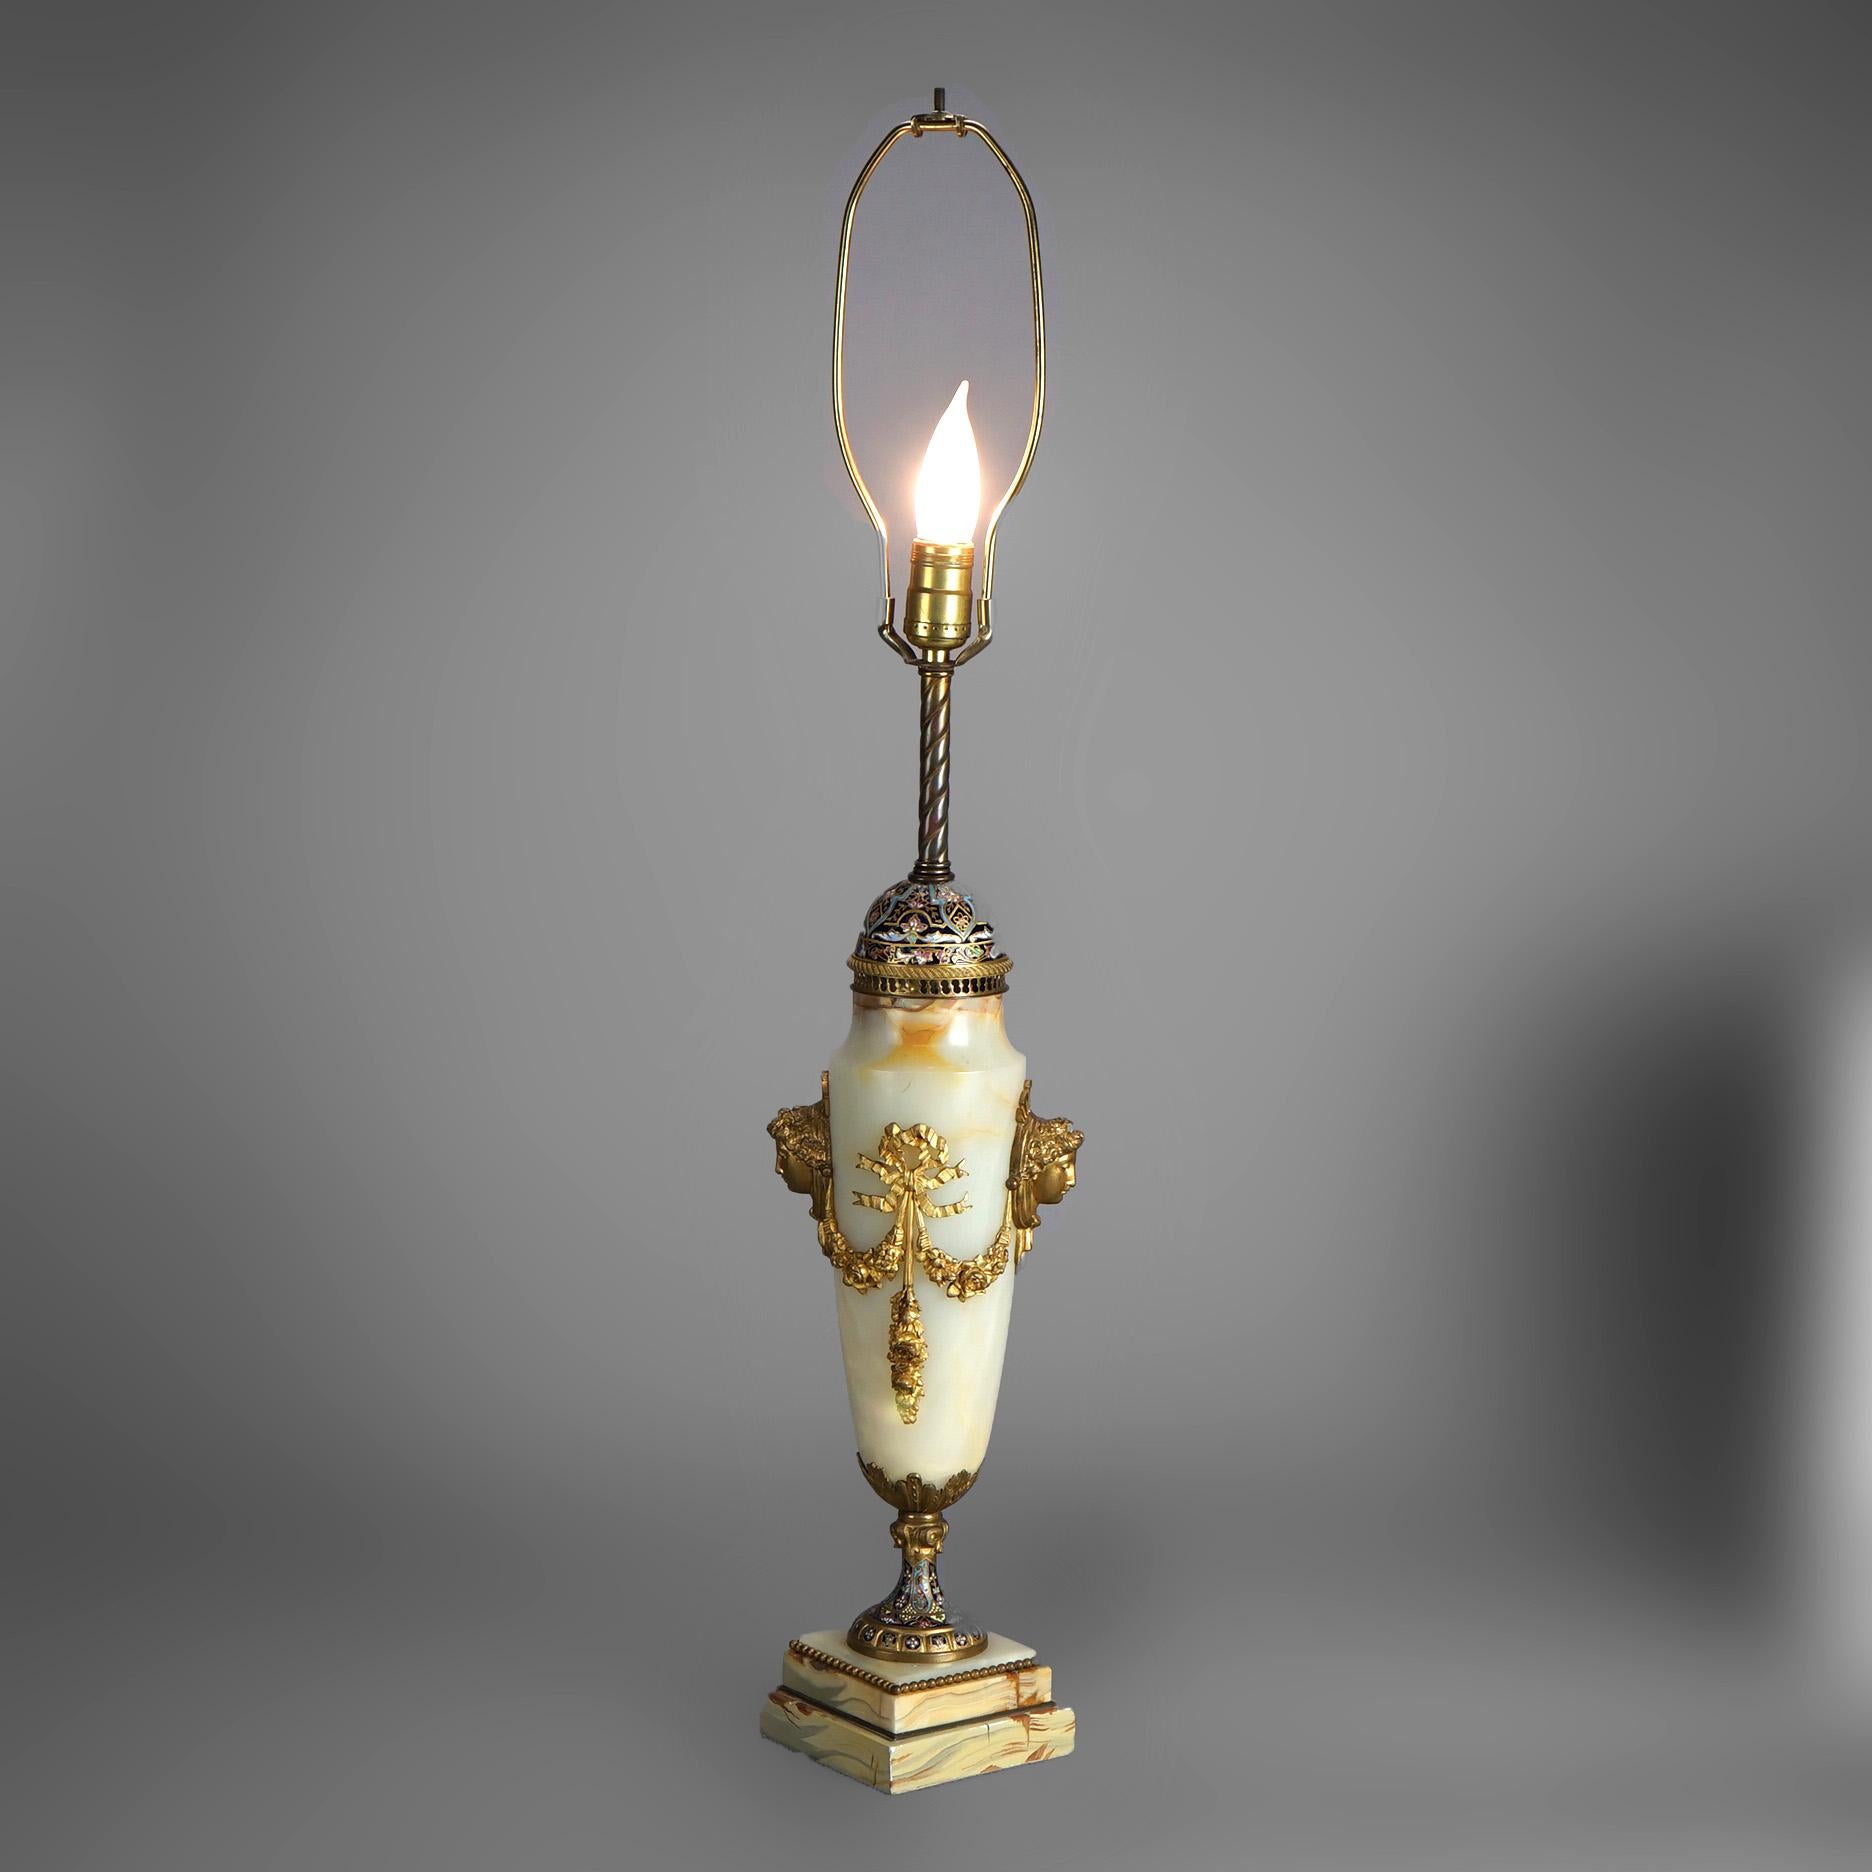 20th Century Antique French Onyx, Ormolu & Champleve Enameled Table Lamp Circa 1920